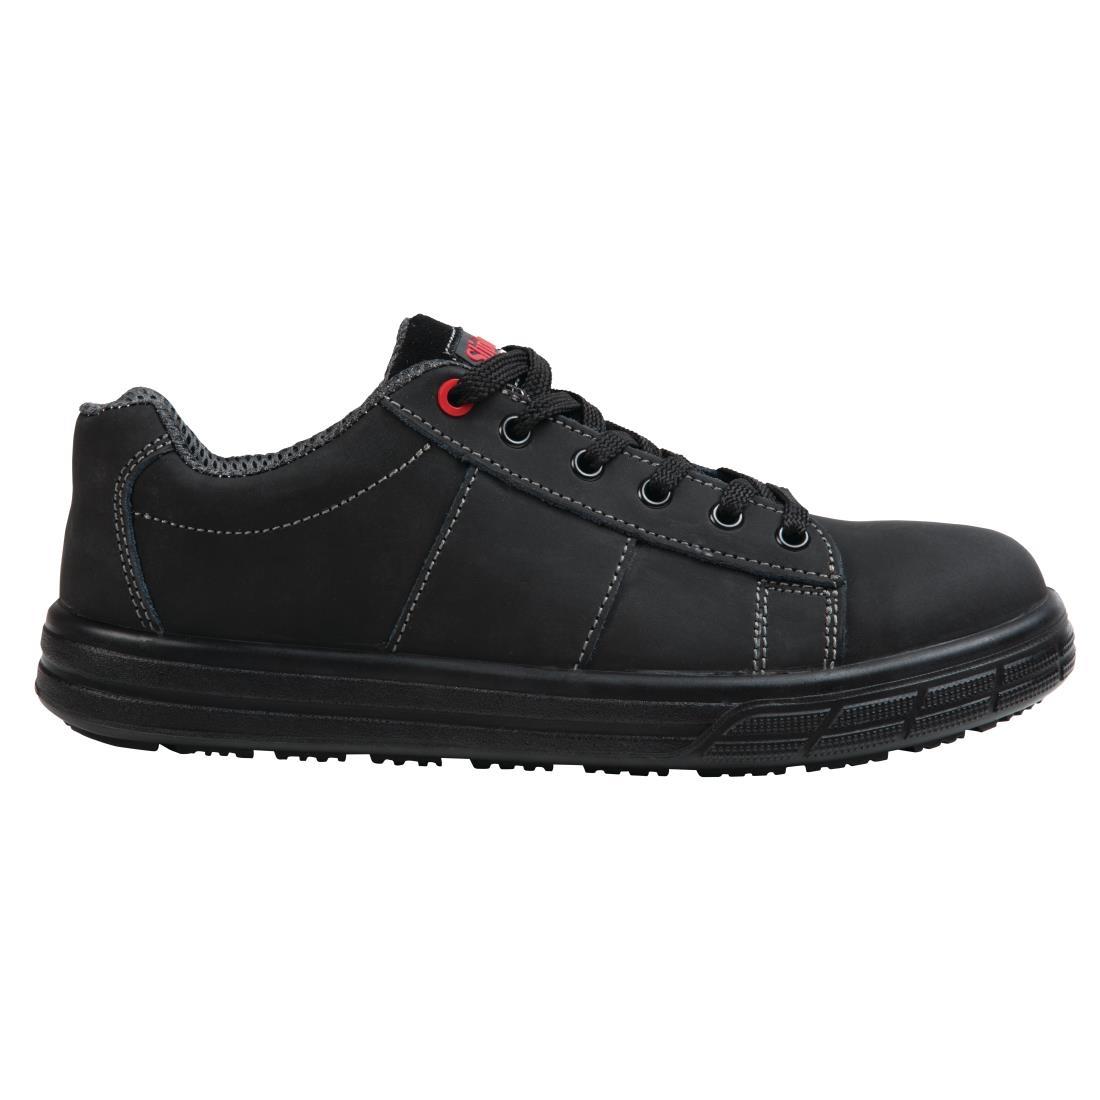 Slipbuster Safety Trainers Black 39 - BB420-39  - 5